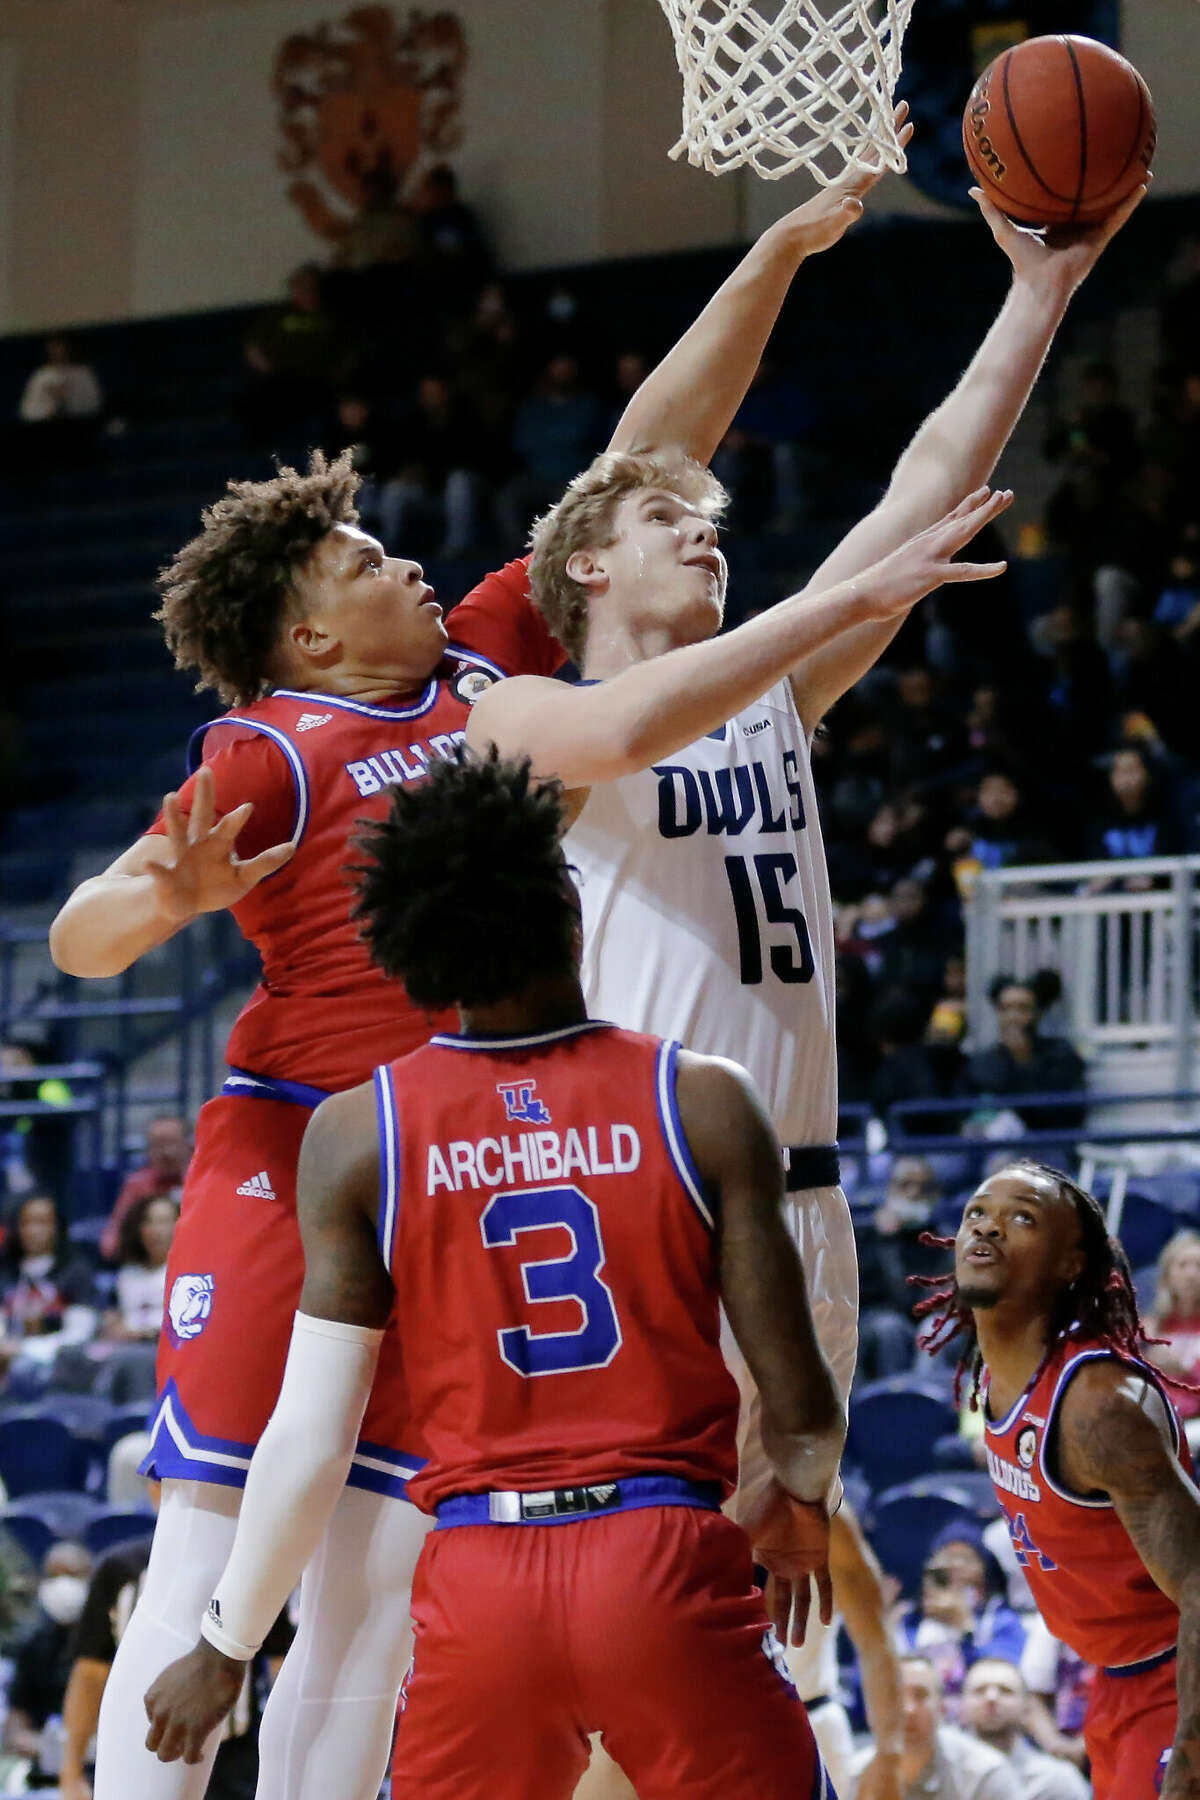 Rice's Max Fiedler (15) puts up a shot past LA Tech's Kenneth Lofton, left, and Amorie Archibald (3) during the first half of a NCAA basketball game Thursday, Feb. 24, 2022 in Houston, TX.